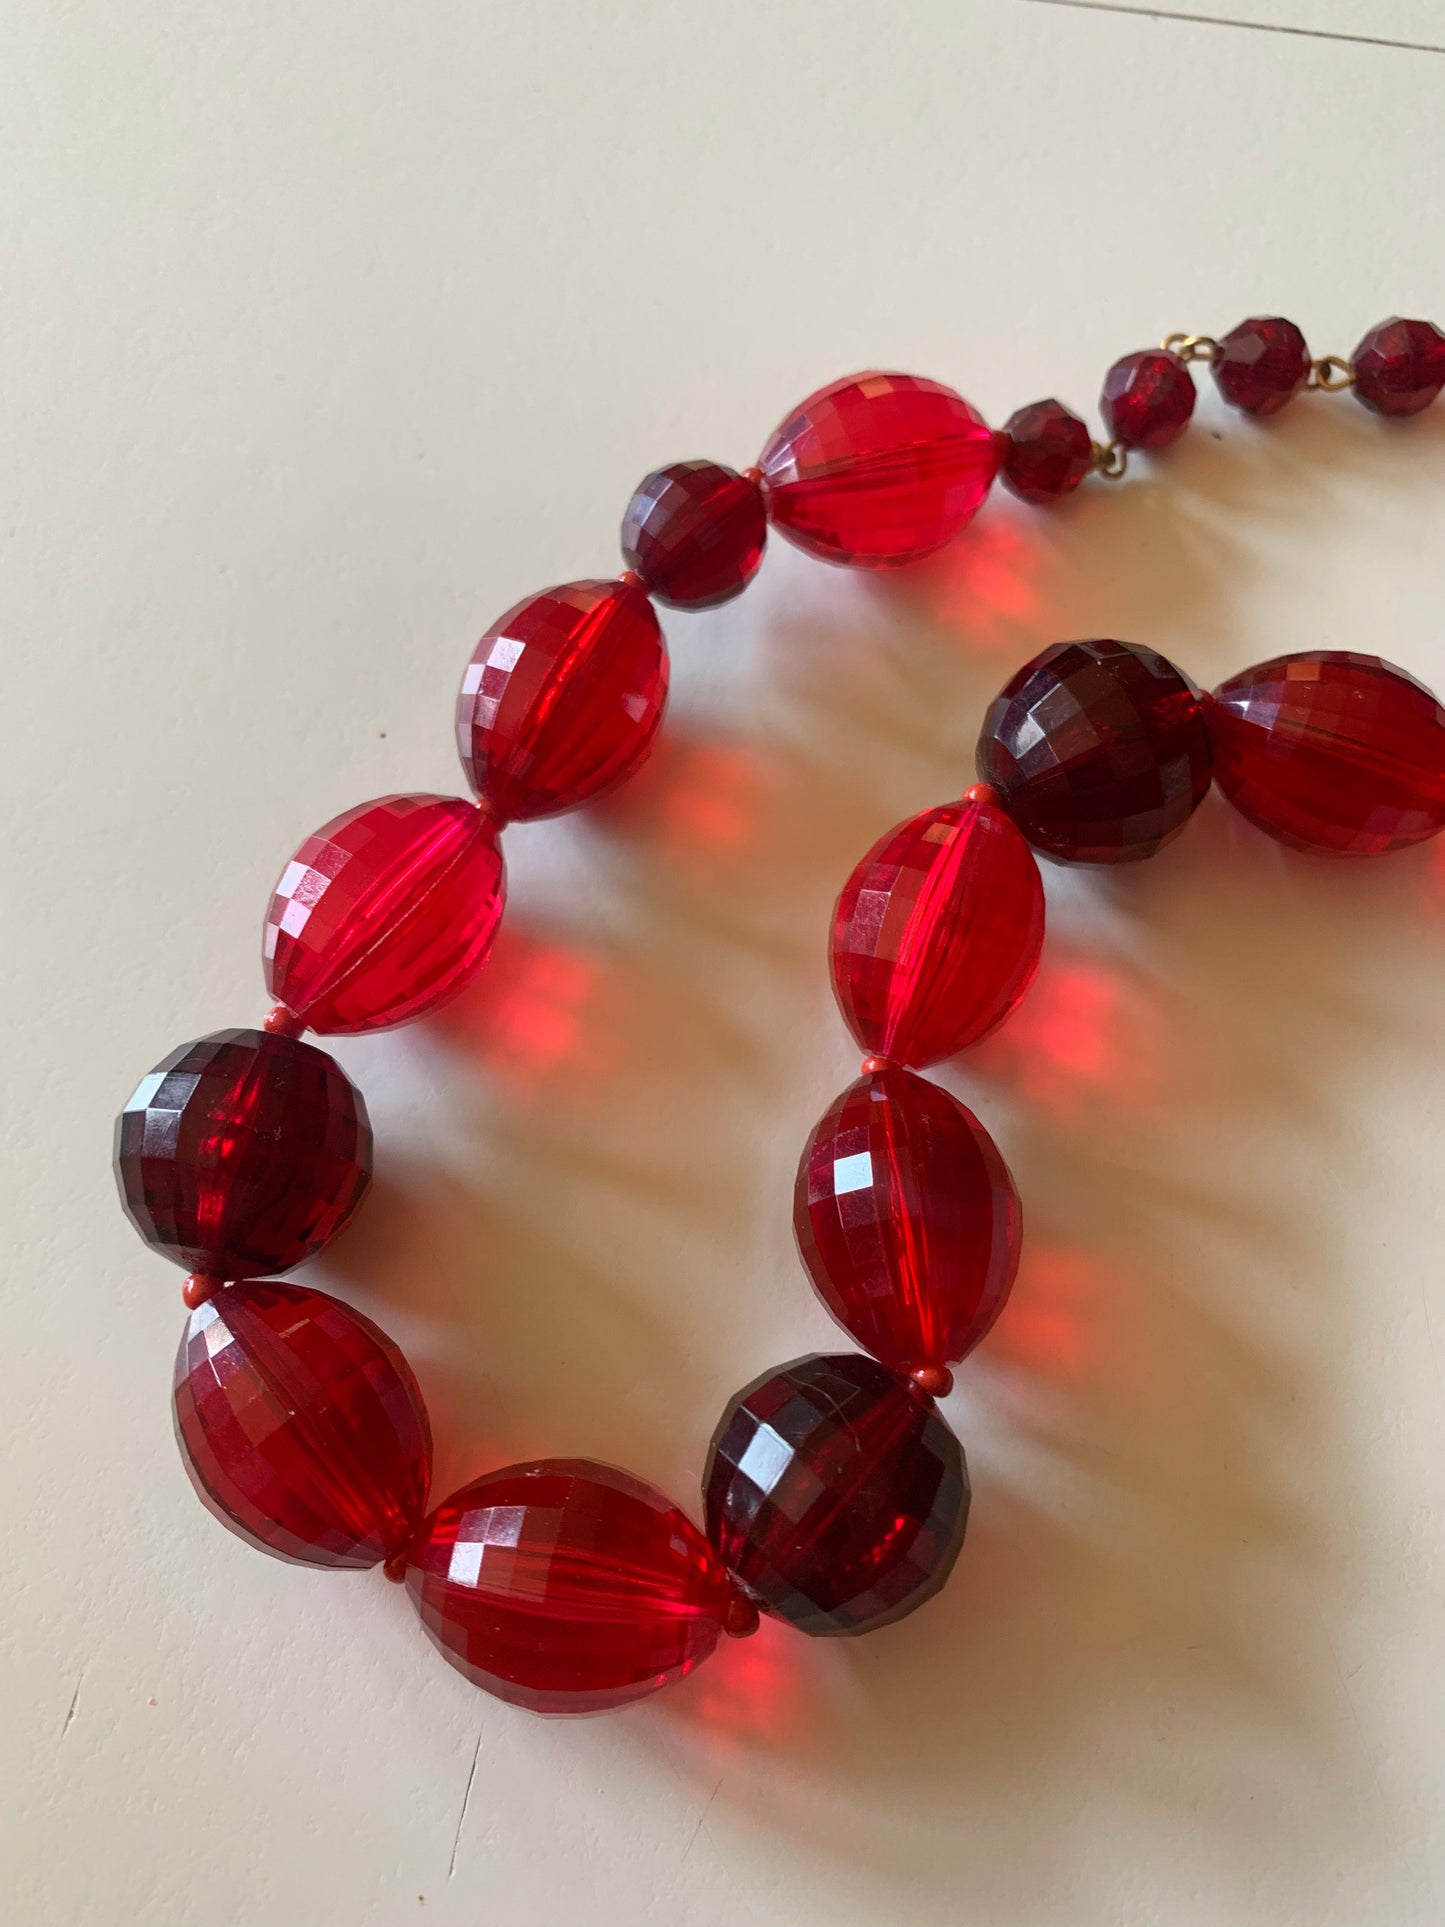 Vivid Red and Pink Beveled Glass Bead Necklace circa 1960s